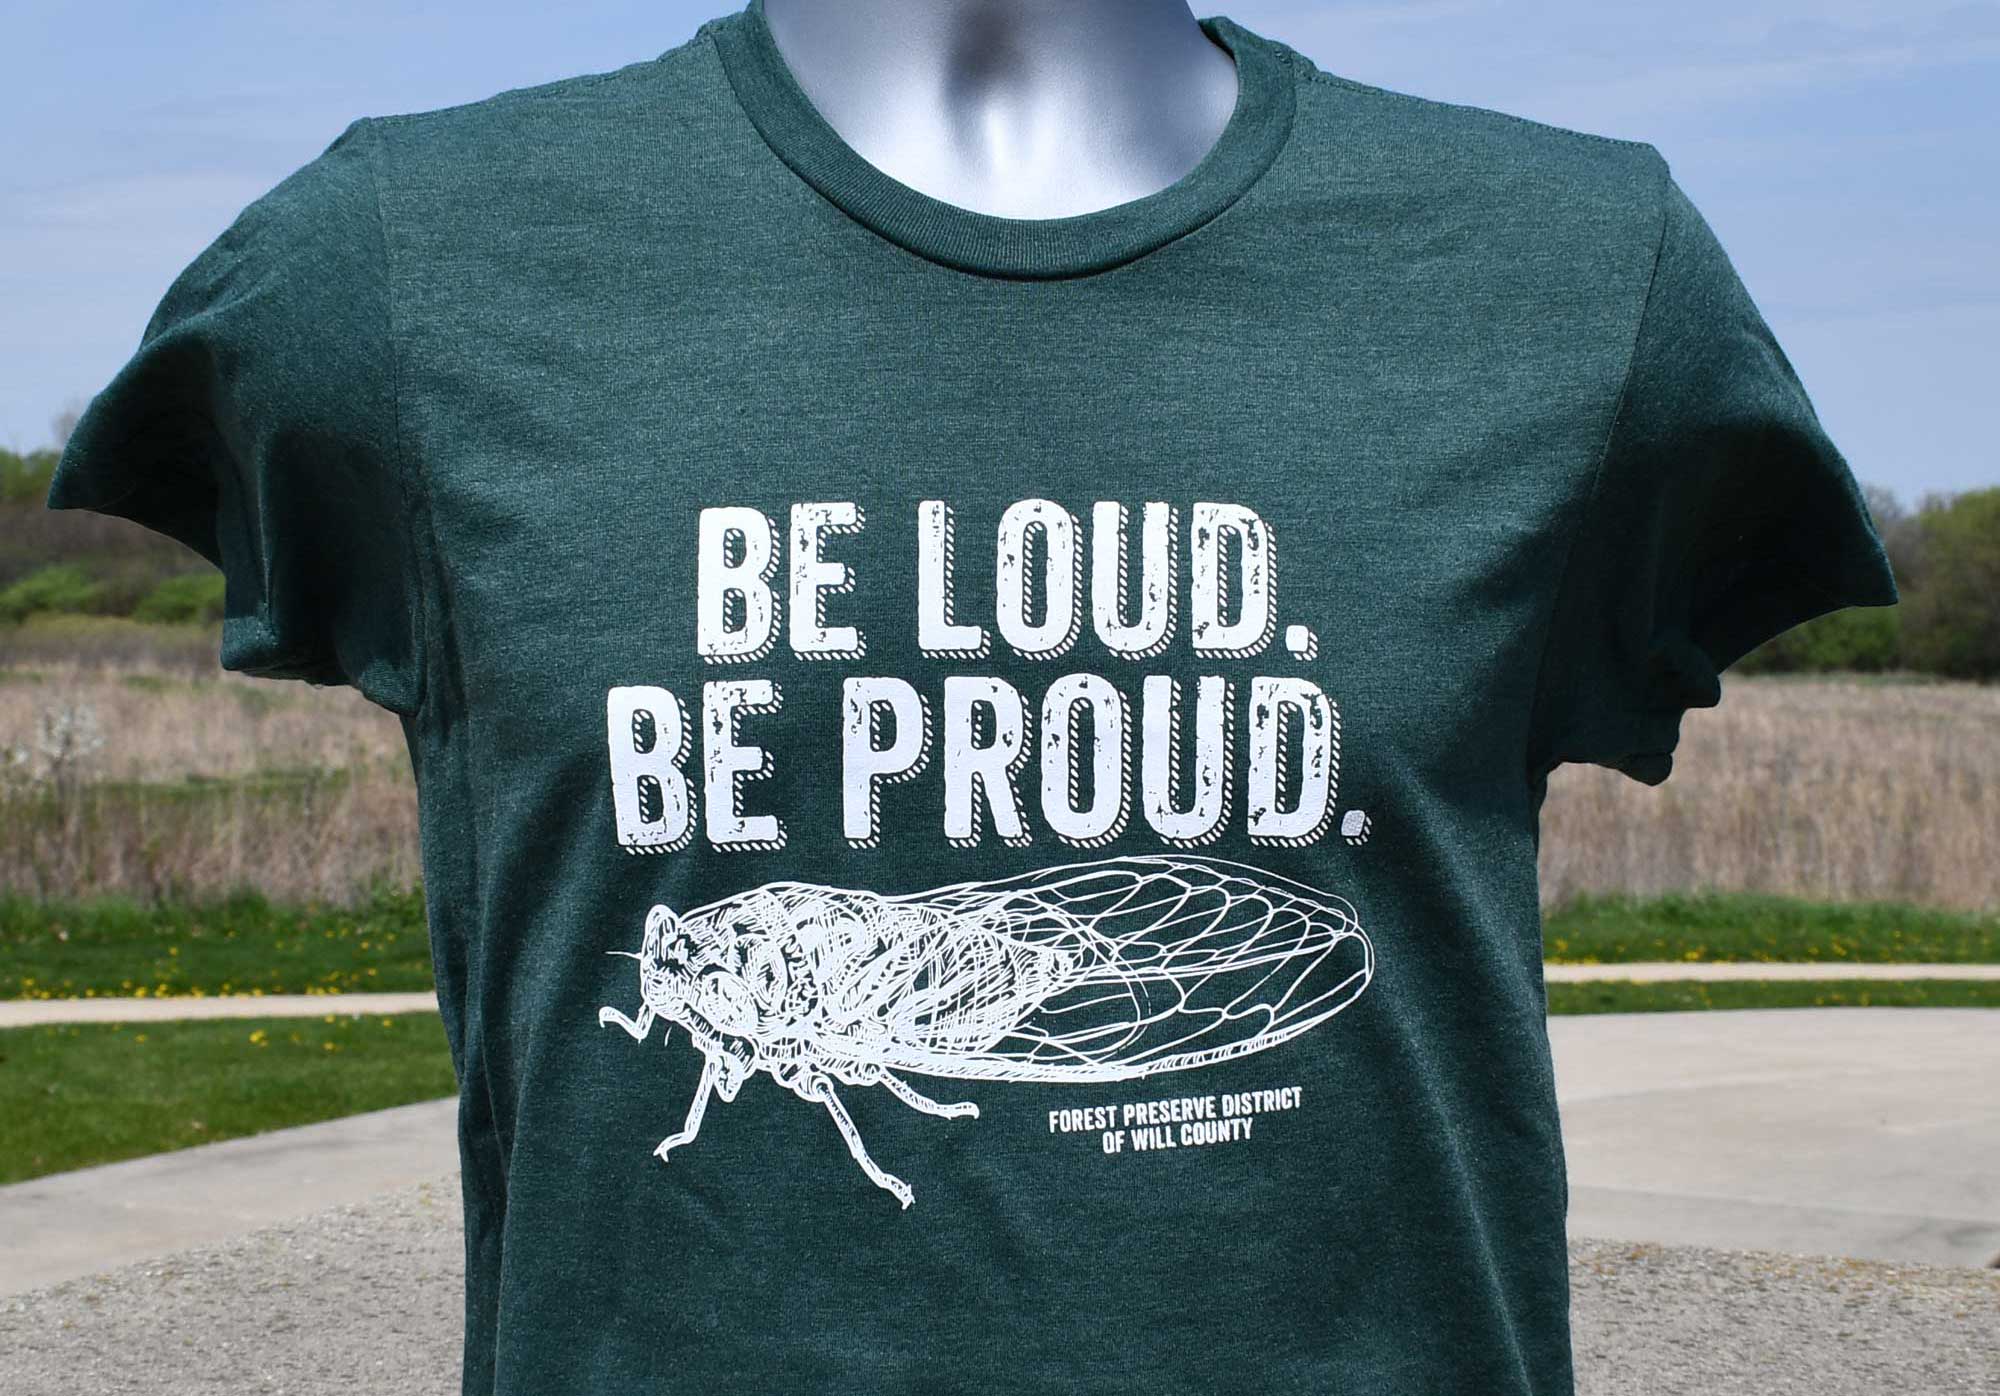 Image of a green shirt featuring a cicada and be loud be proud wording